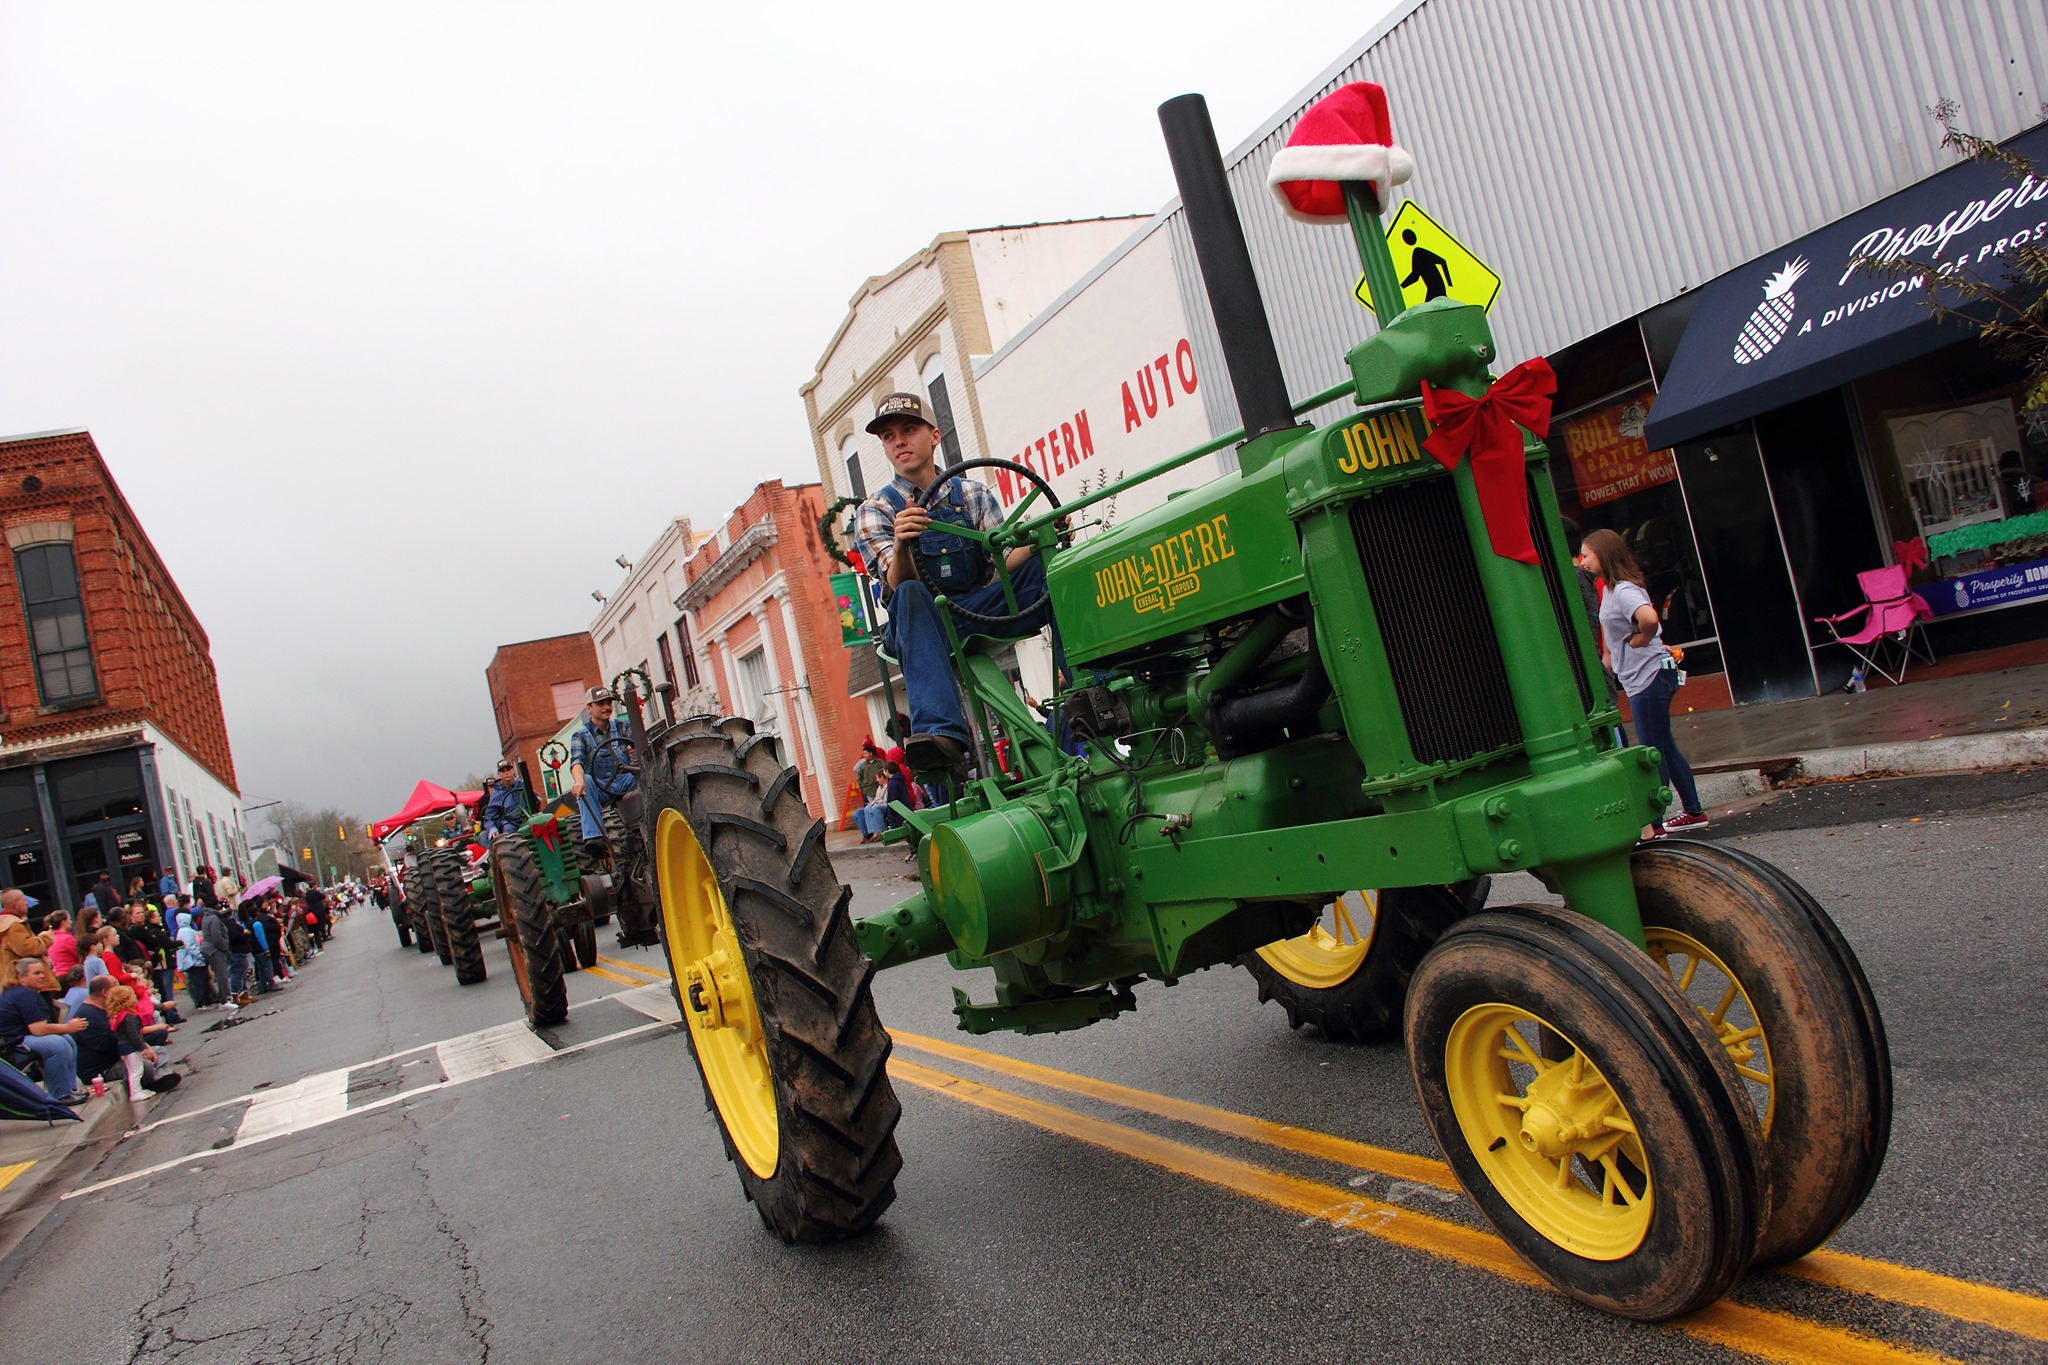 young man dressed as a farmer on an antique john deere tractor on a rainy day in small town in them middle of main street for a parade of tractors behind him